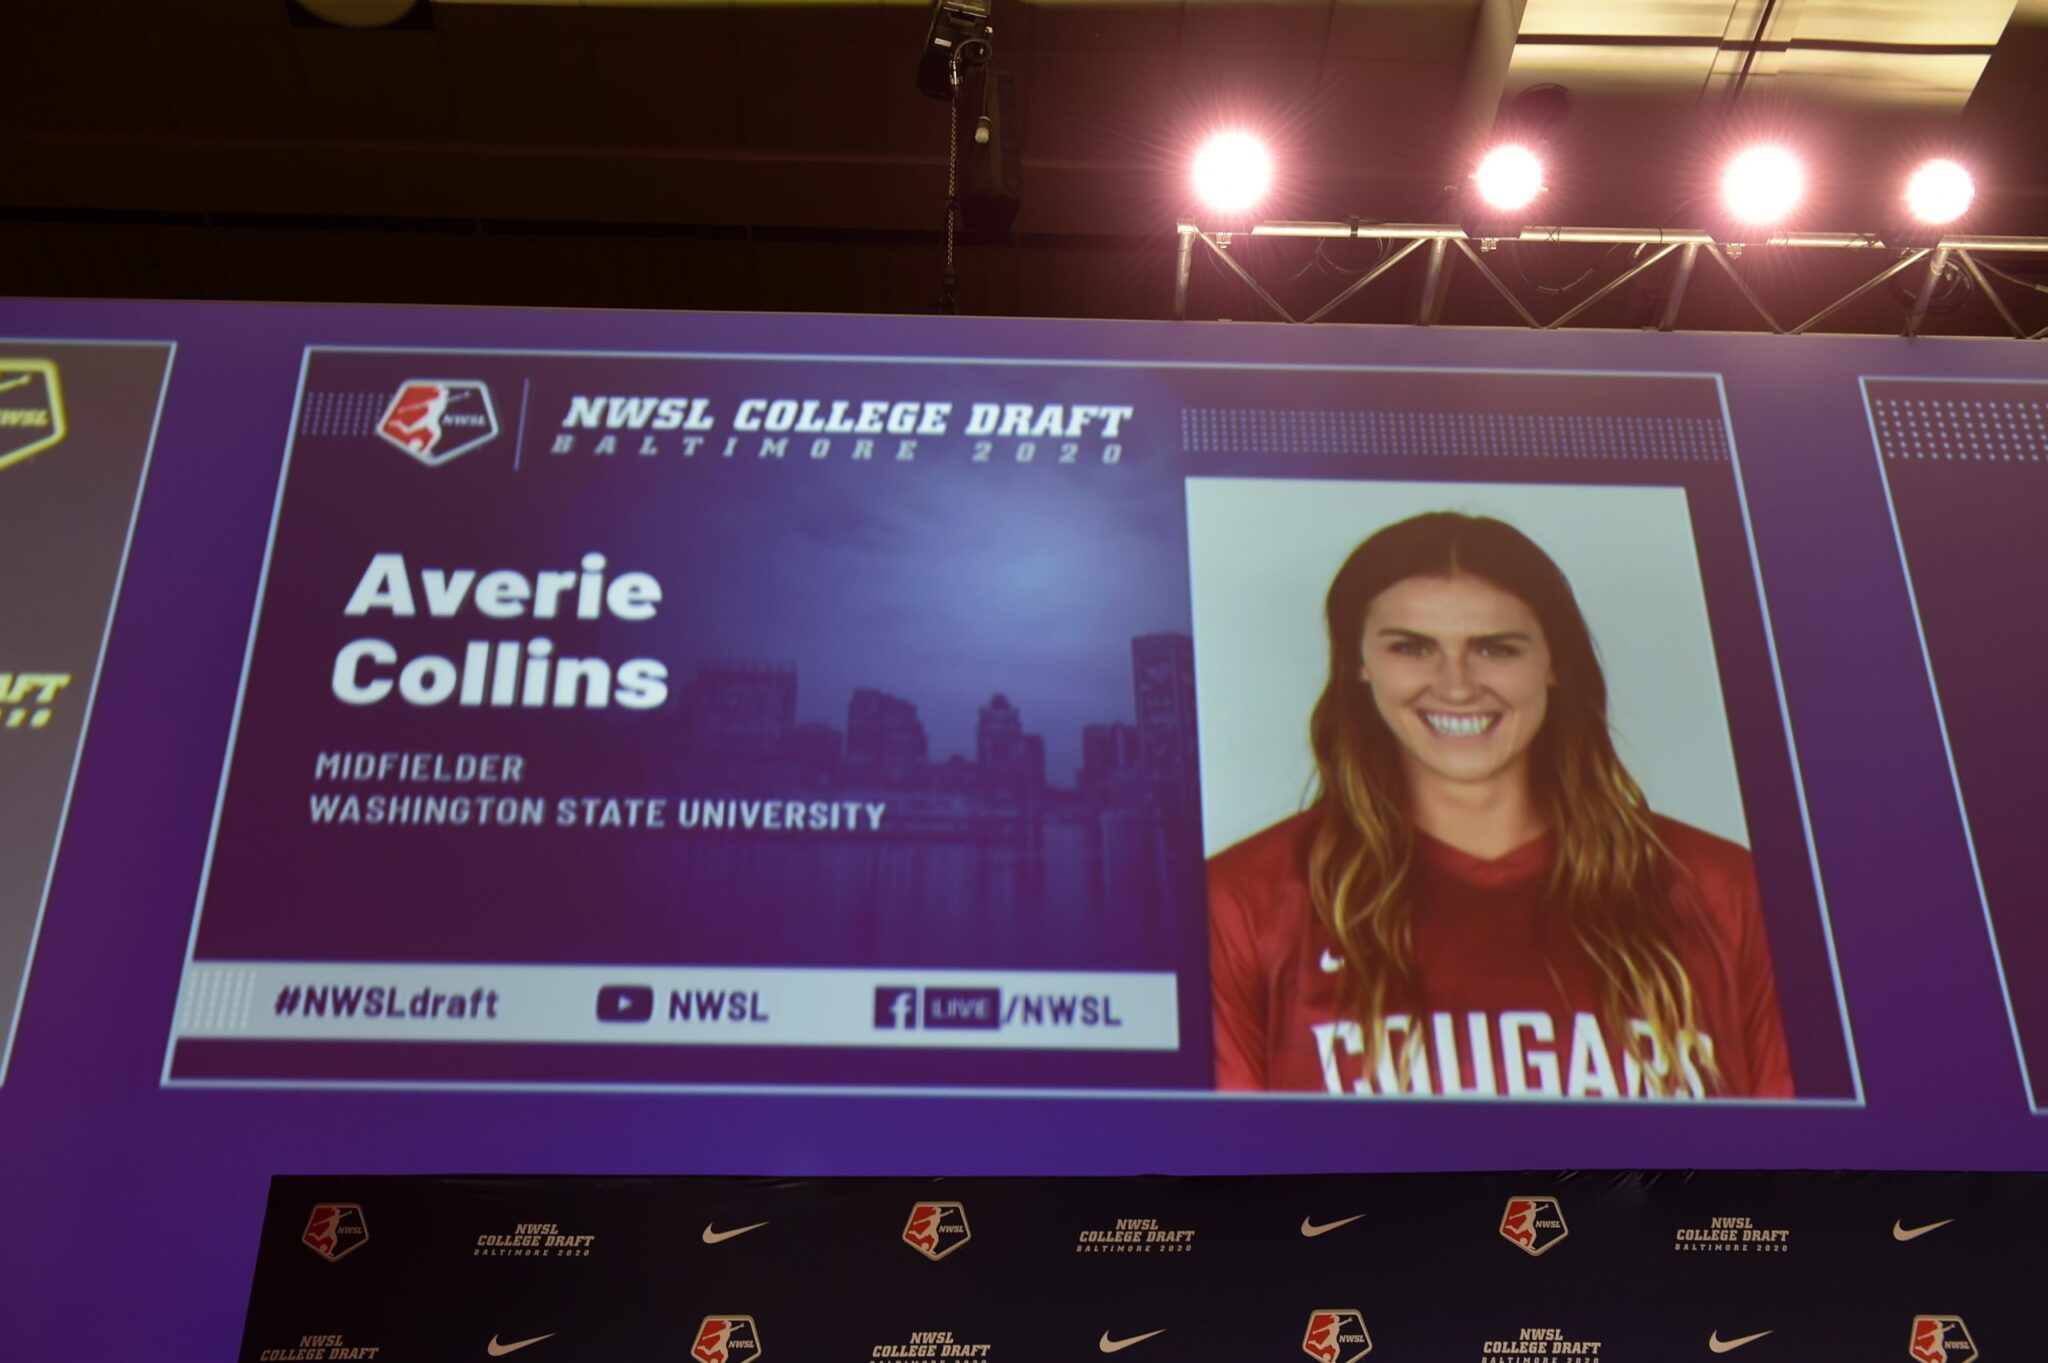 Washington Spirit select Averie Collins 17th overall in 2020 NWSL Draft Featured Image